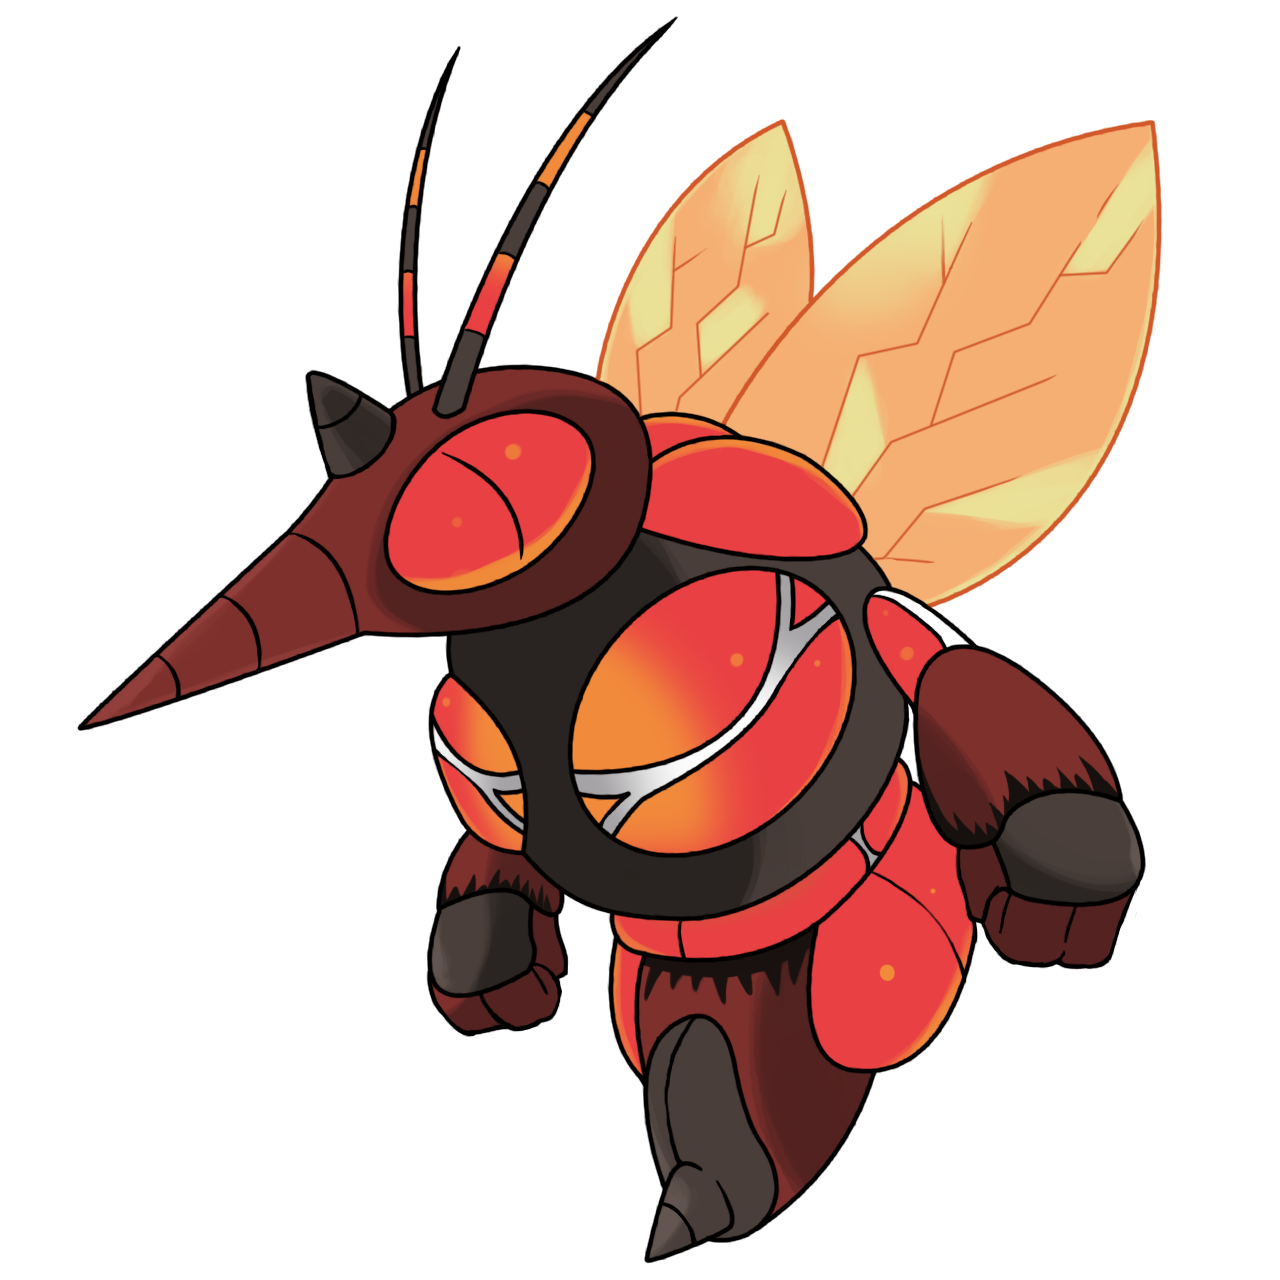 Mosquito clipart skin problem. Ub buzzwole redesign by